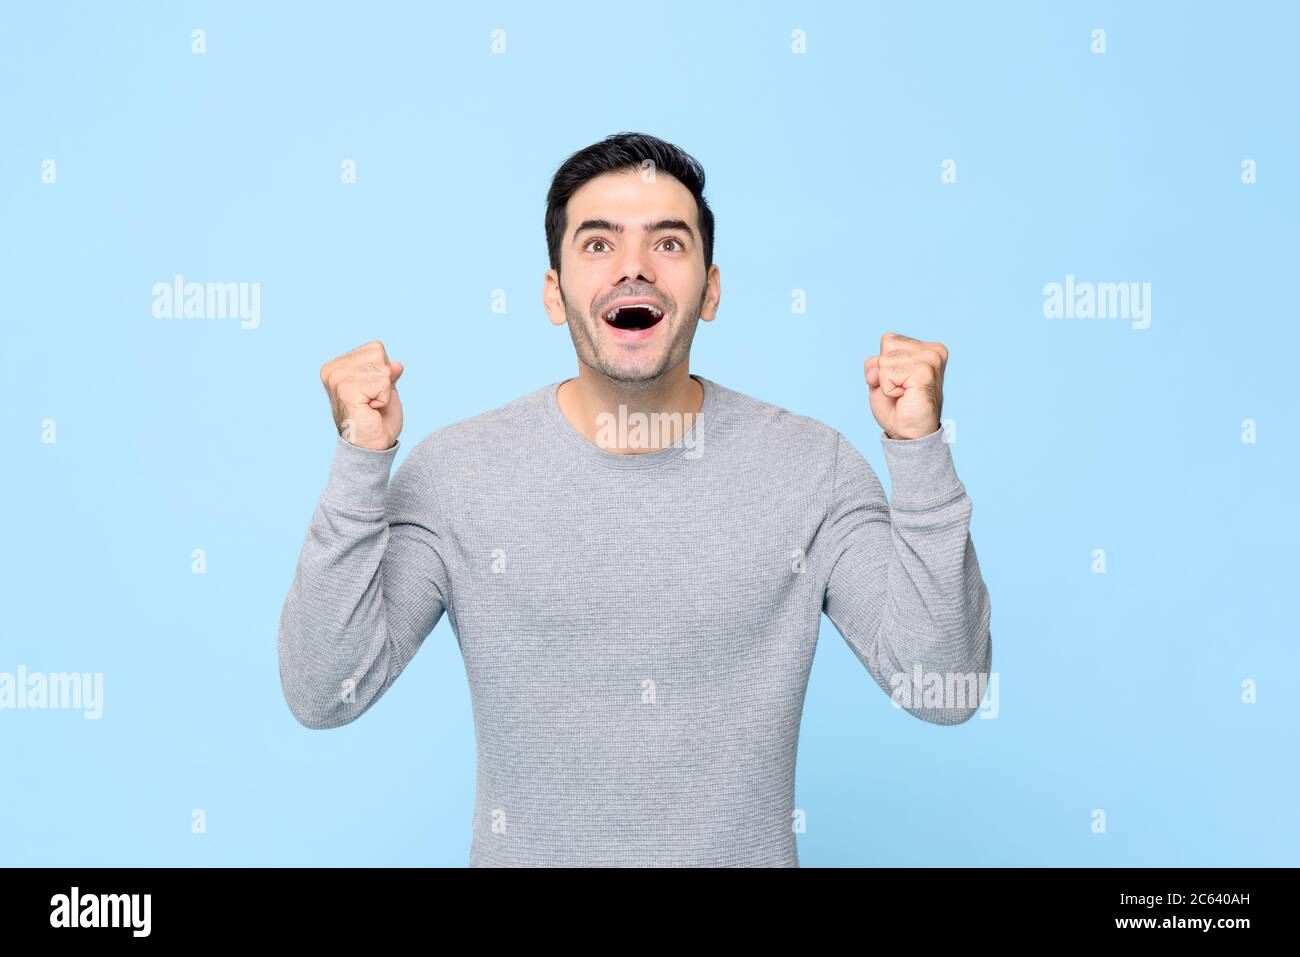 Excited surprised Caucasian man clenching his fists and looking up isolated on light blue background Stock Photo